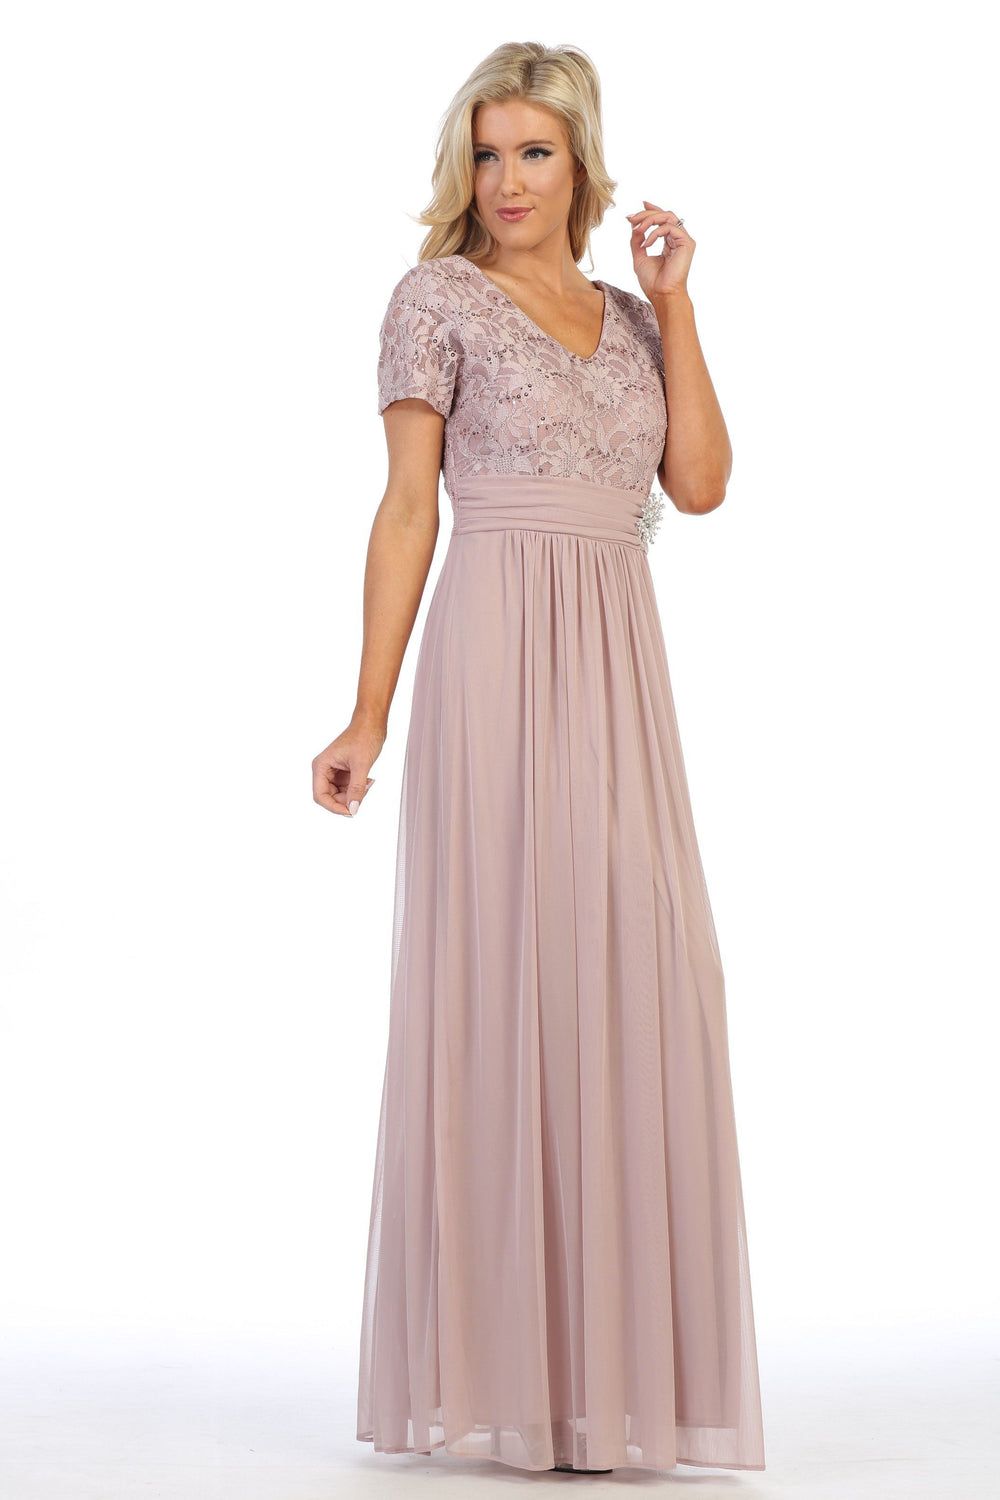 Long Lace Bodice Dress with Short Sleeves by Celavie 6320L-Long Formal Dresses-ABC Fashion